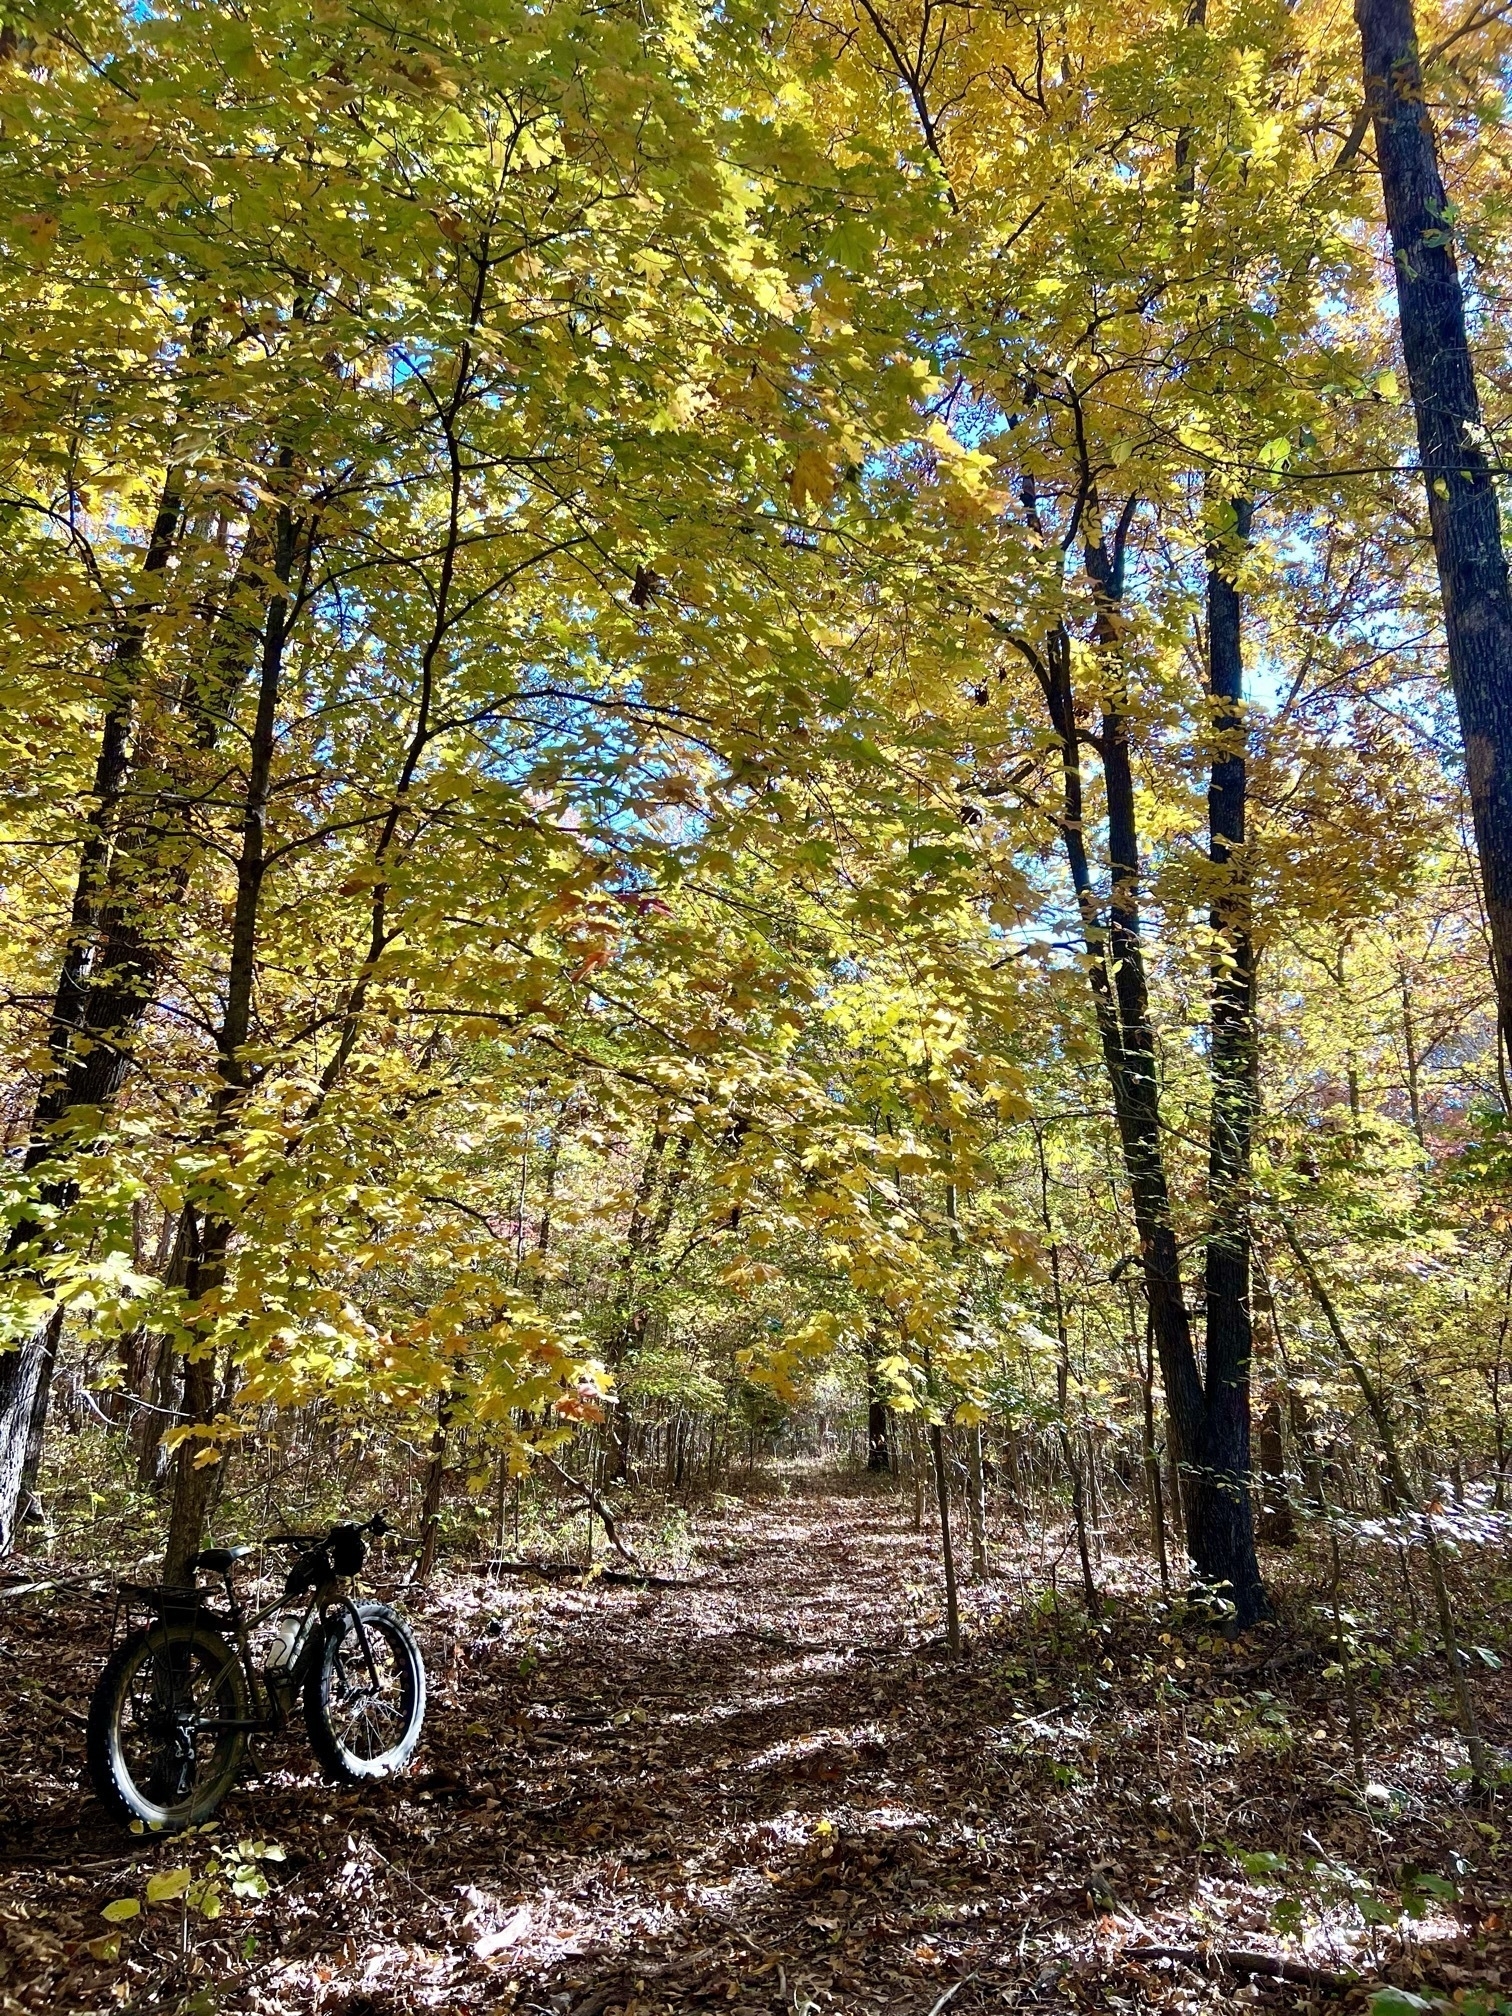 A fat tire bike leaves against a tree near a leaf-covered trail under a canopy of bright yellow and green leaves against a bright blue sky.